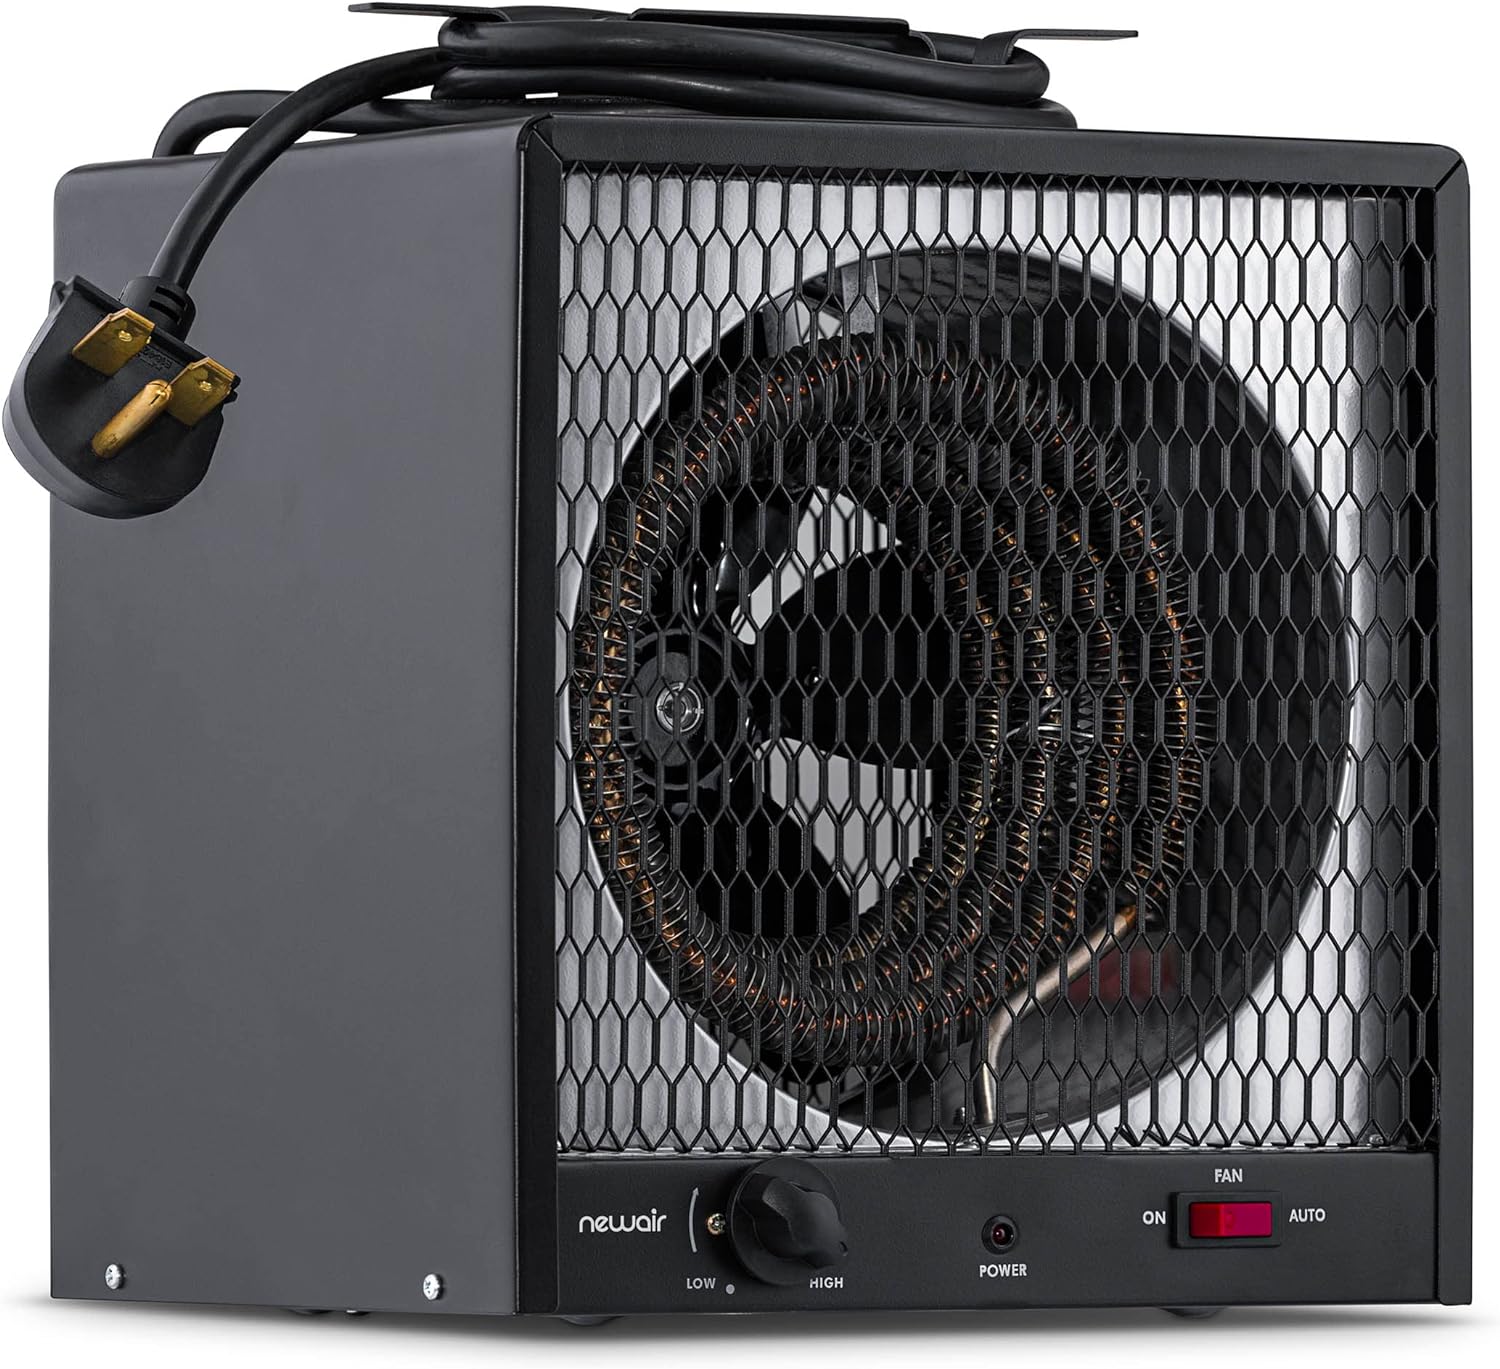 5600W 240V NewAir G56 Portable Electric Garage Heater w/ 6' Cord & Carrying Handle $60 + Free Shipping